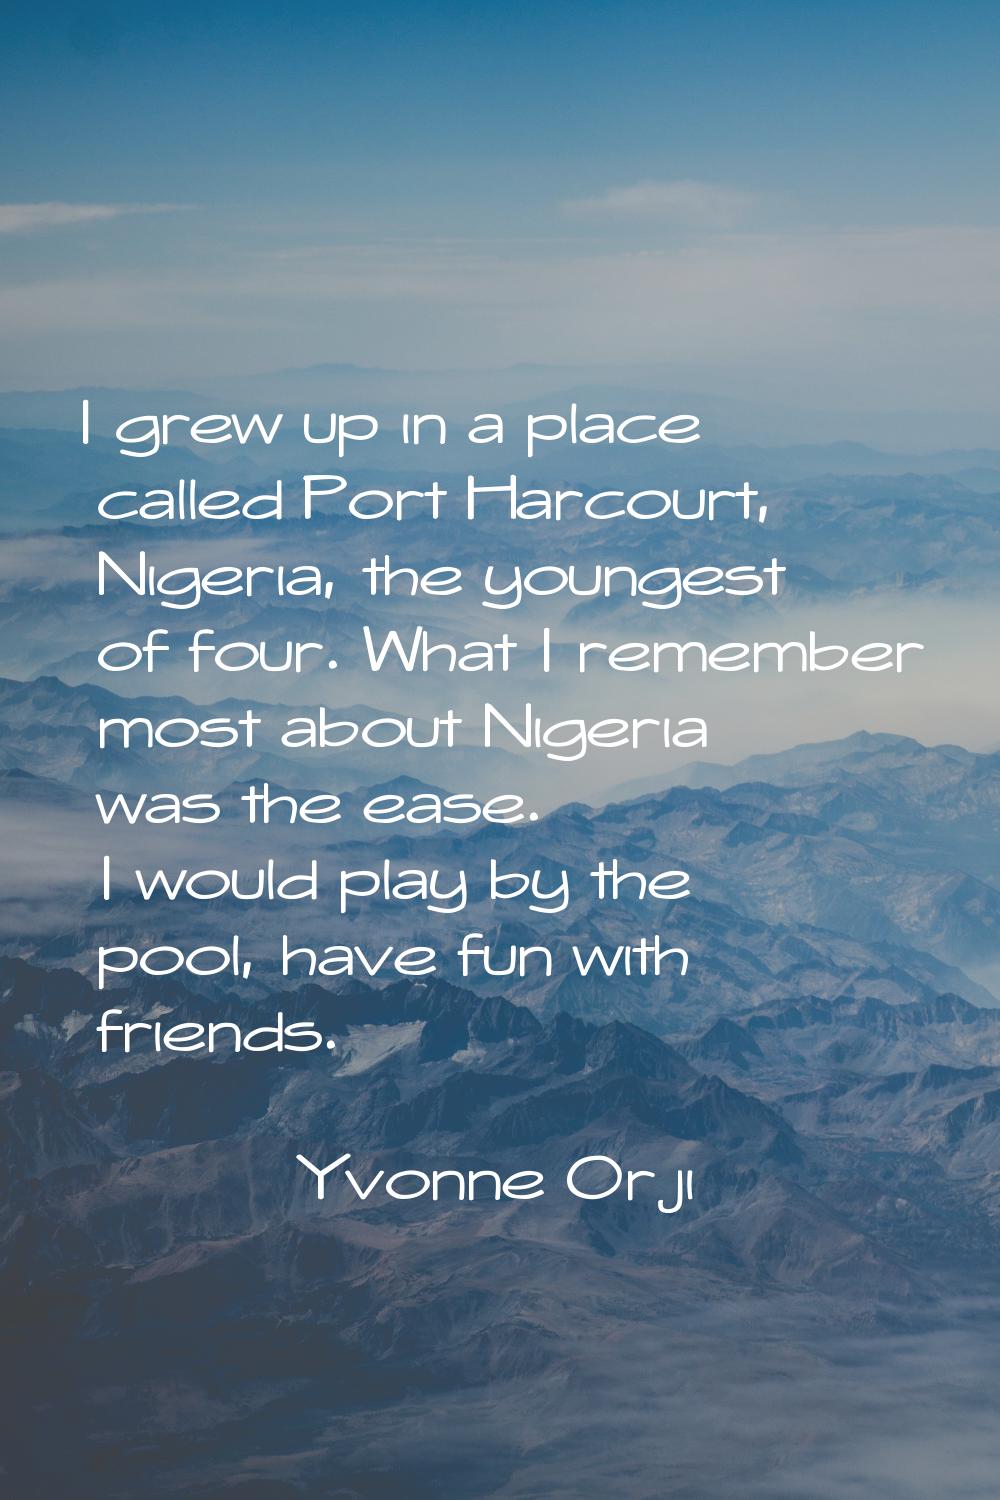 I grew up in a place called Port Harcourt, Nigeria, the youngest of four. What I remember most abou